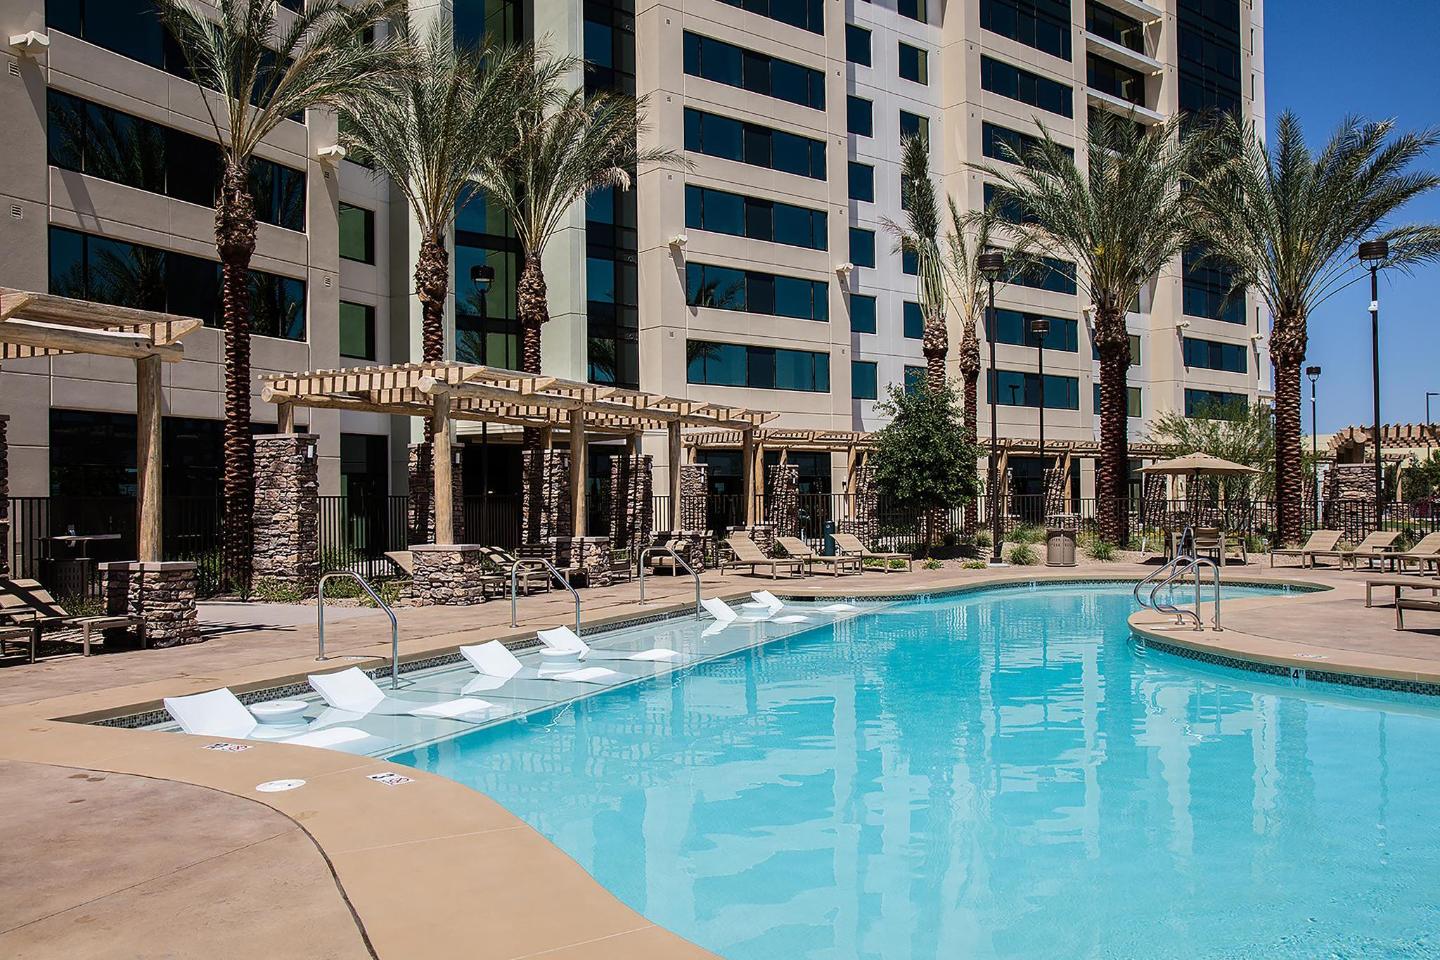 The 10 best serviced apartments in Las Vegas, USA | Booking.com